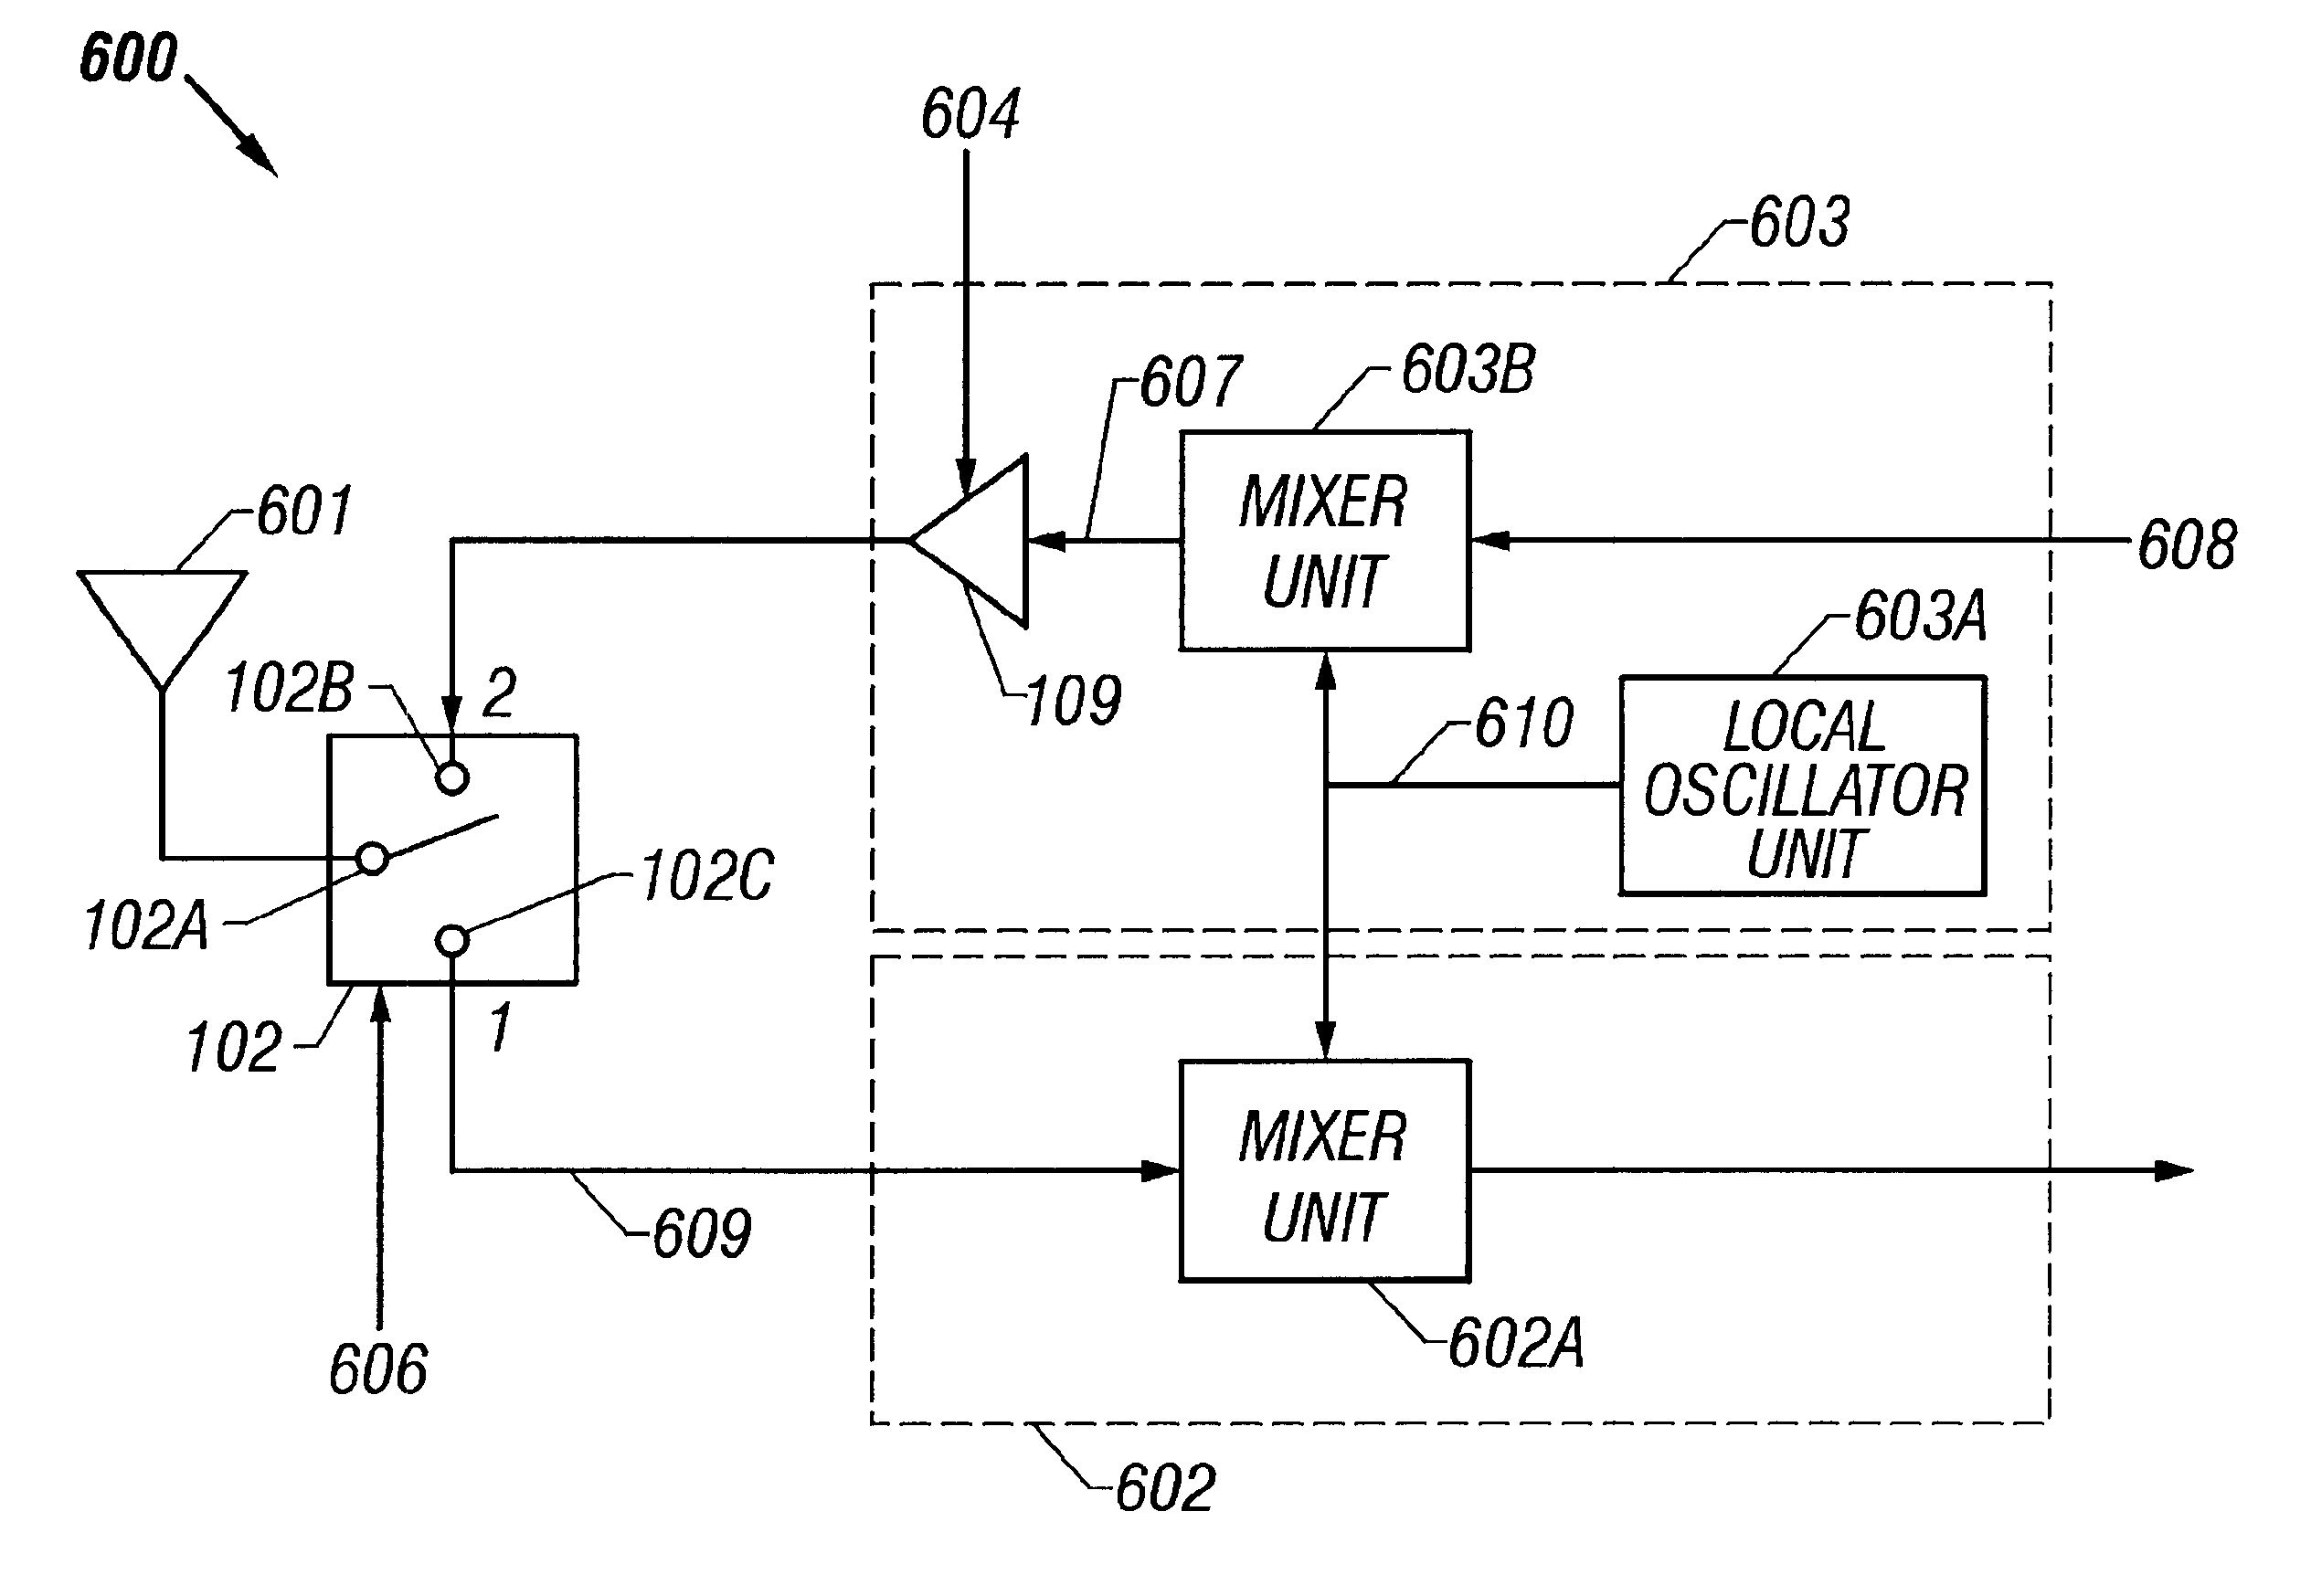 Apparatus and method to reduce power amplifier noise generation in a multiplexed communication system